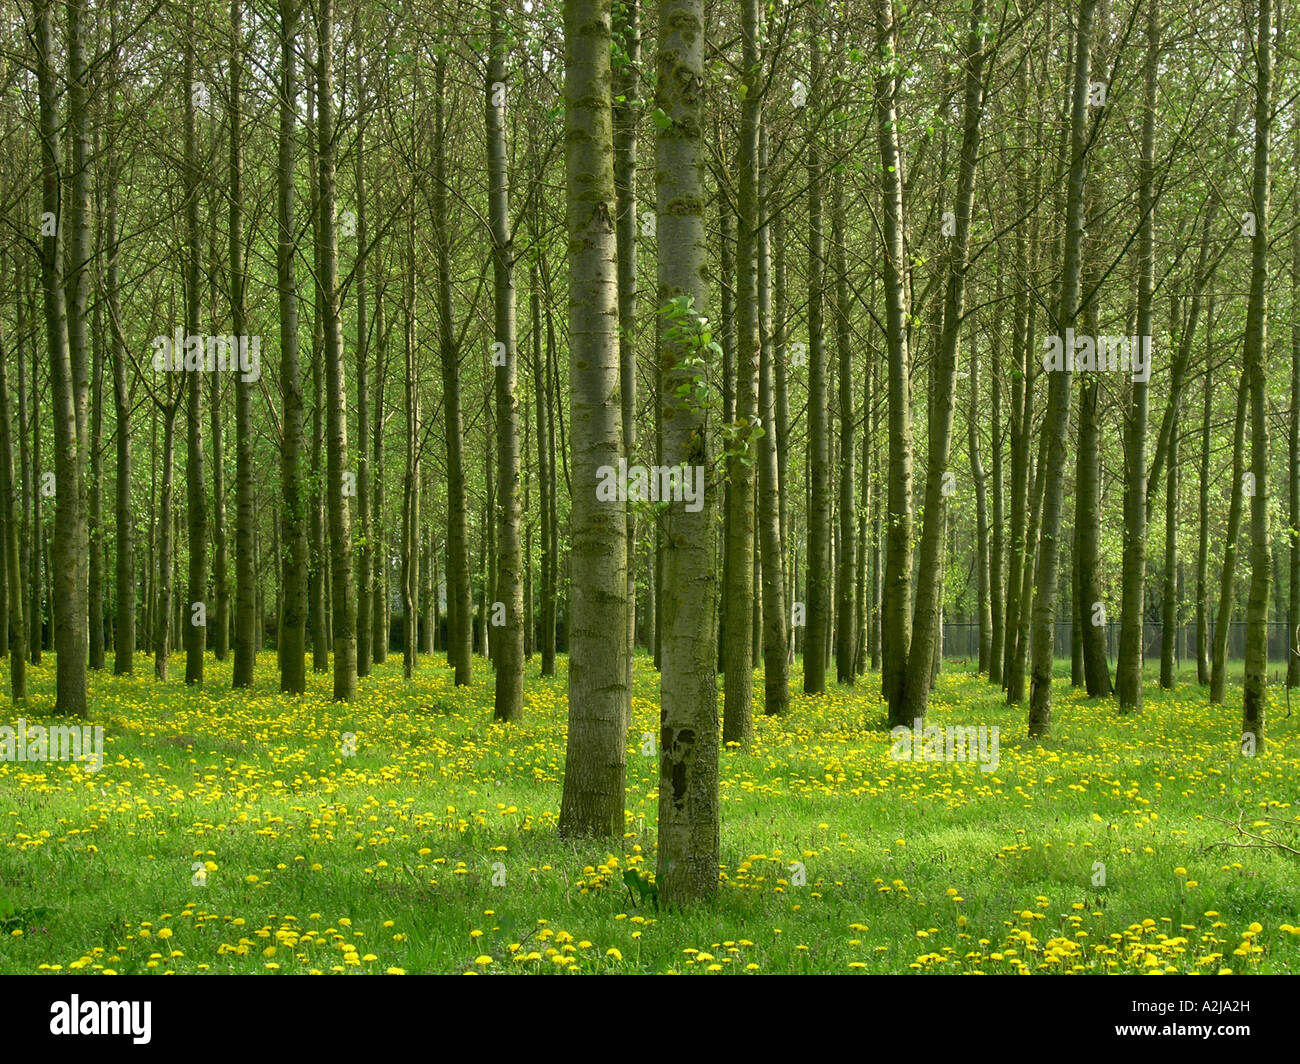 Frame filling image with row of parallel trees in field with some scattered dandelions on woodfloor Stock Photo